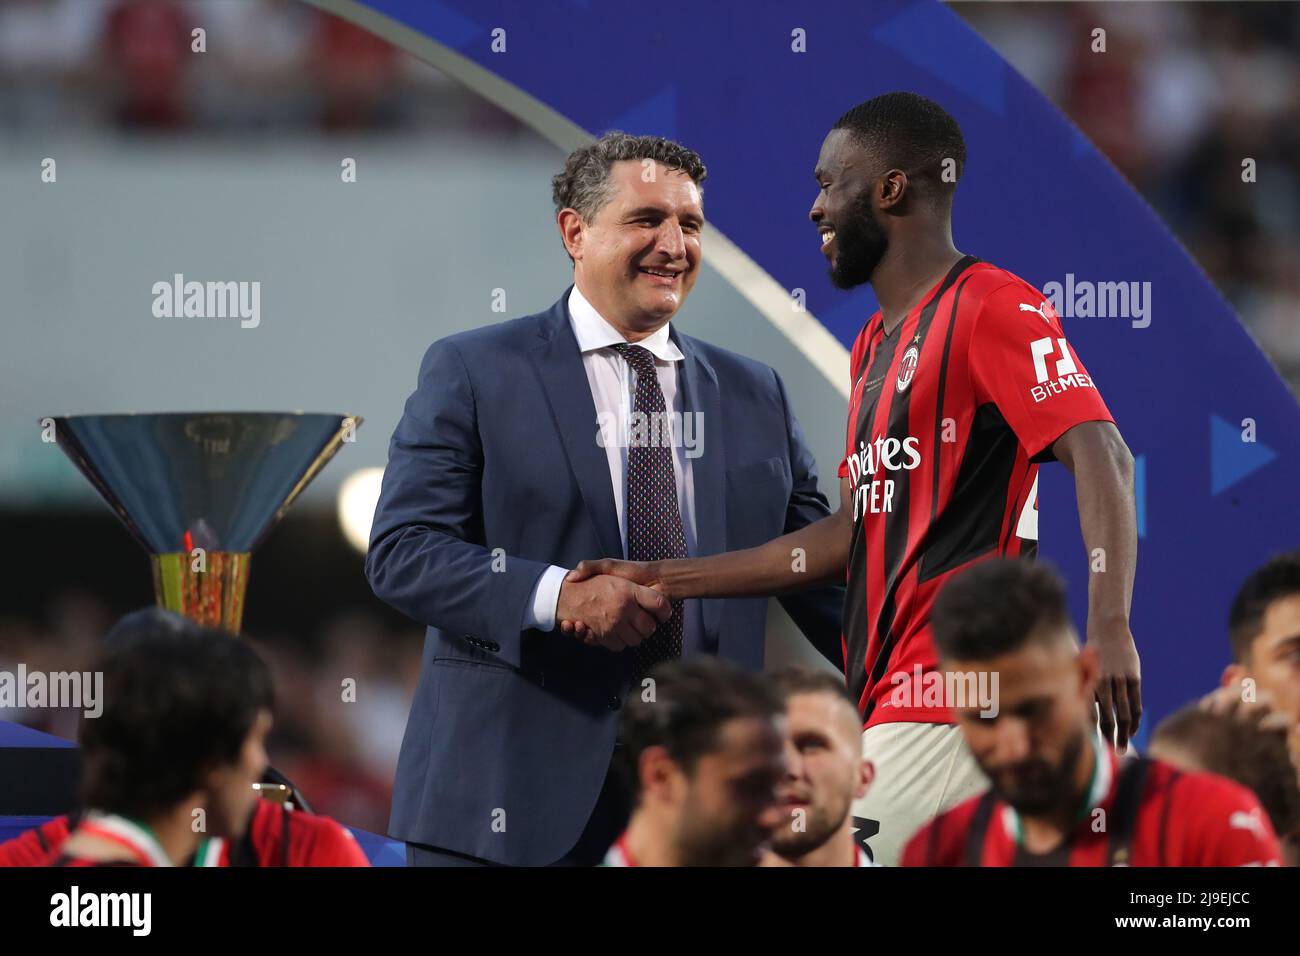 Sassuolo, Italy. 22nd May, 2022. Fikayo Tomori of AC Milan shakes hands with Luigi De Siervo Managing Director of Serie A as he steps onto the podium to receive his winners' medal during the trophy presentation following the Serie A match at Mapei Stadium - Cittˆ del Tricolore, Sassuolo. Picture credit should read: Jonathan Moscrop/Sportimage Credit: Sportimage/Alamy Live News Stock Photo